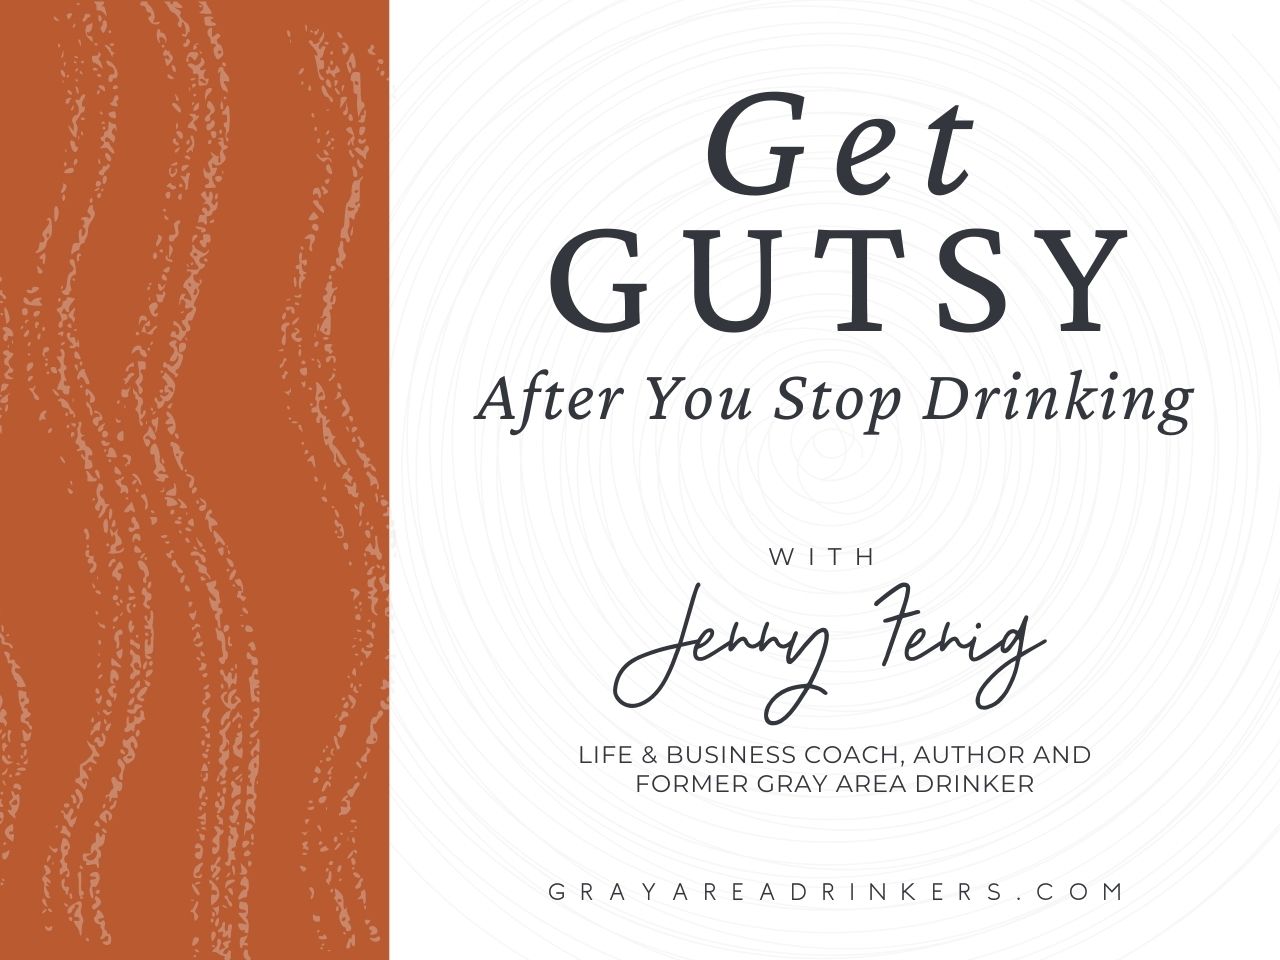 Masterclass - Get Gutsy After You Stop Drinking